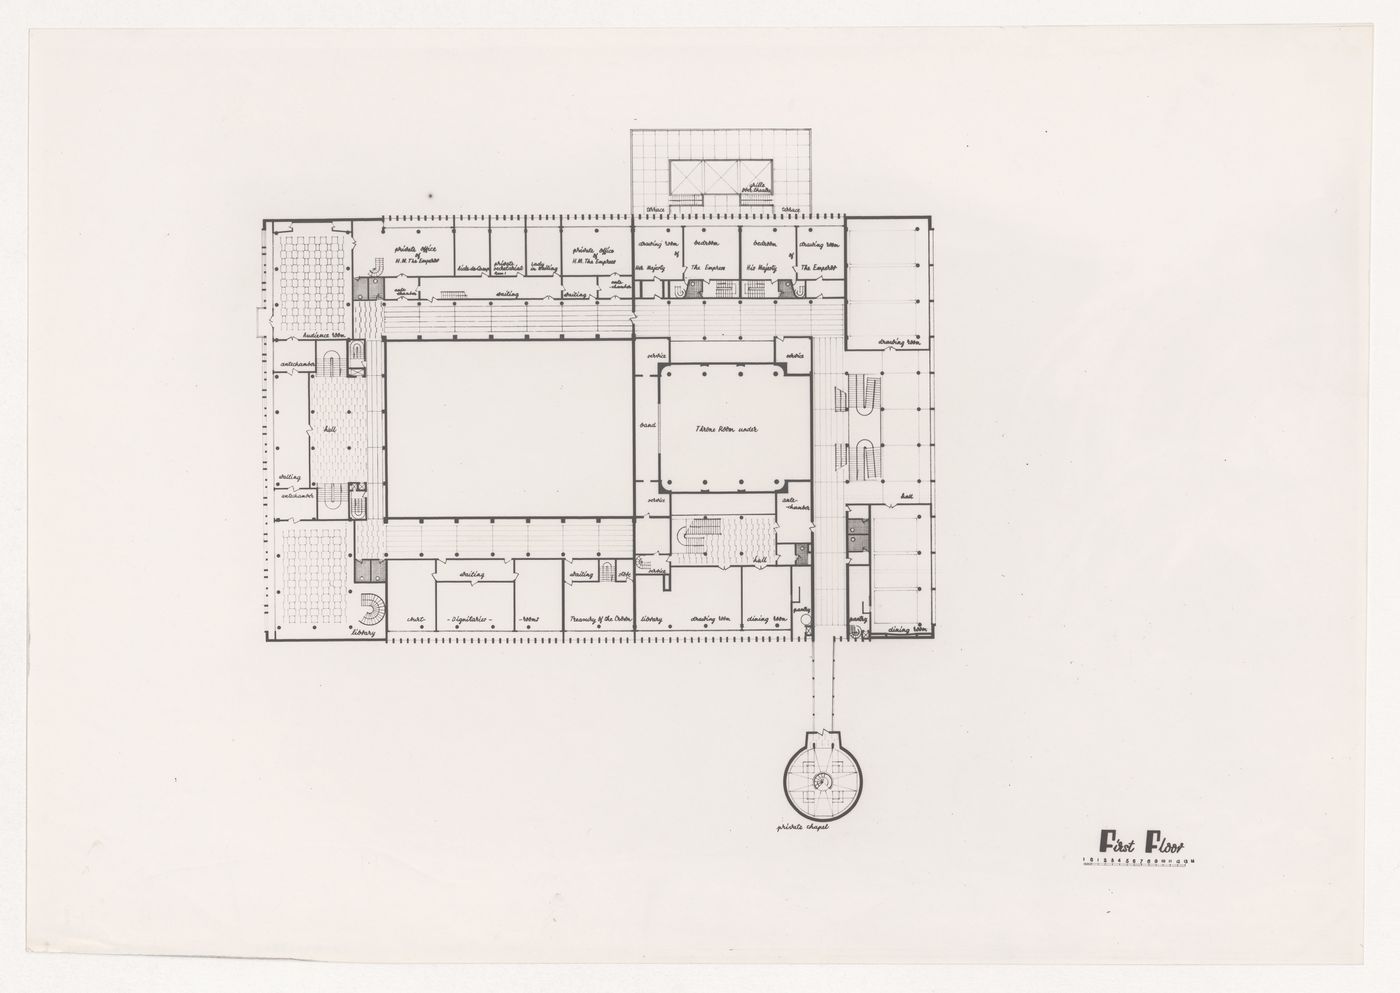 First floor plan for Government House, Addis Ababa, Ethiopia